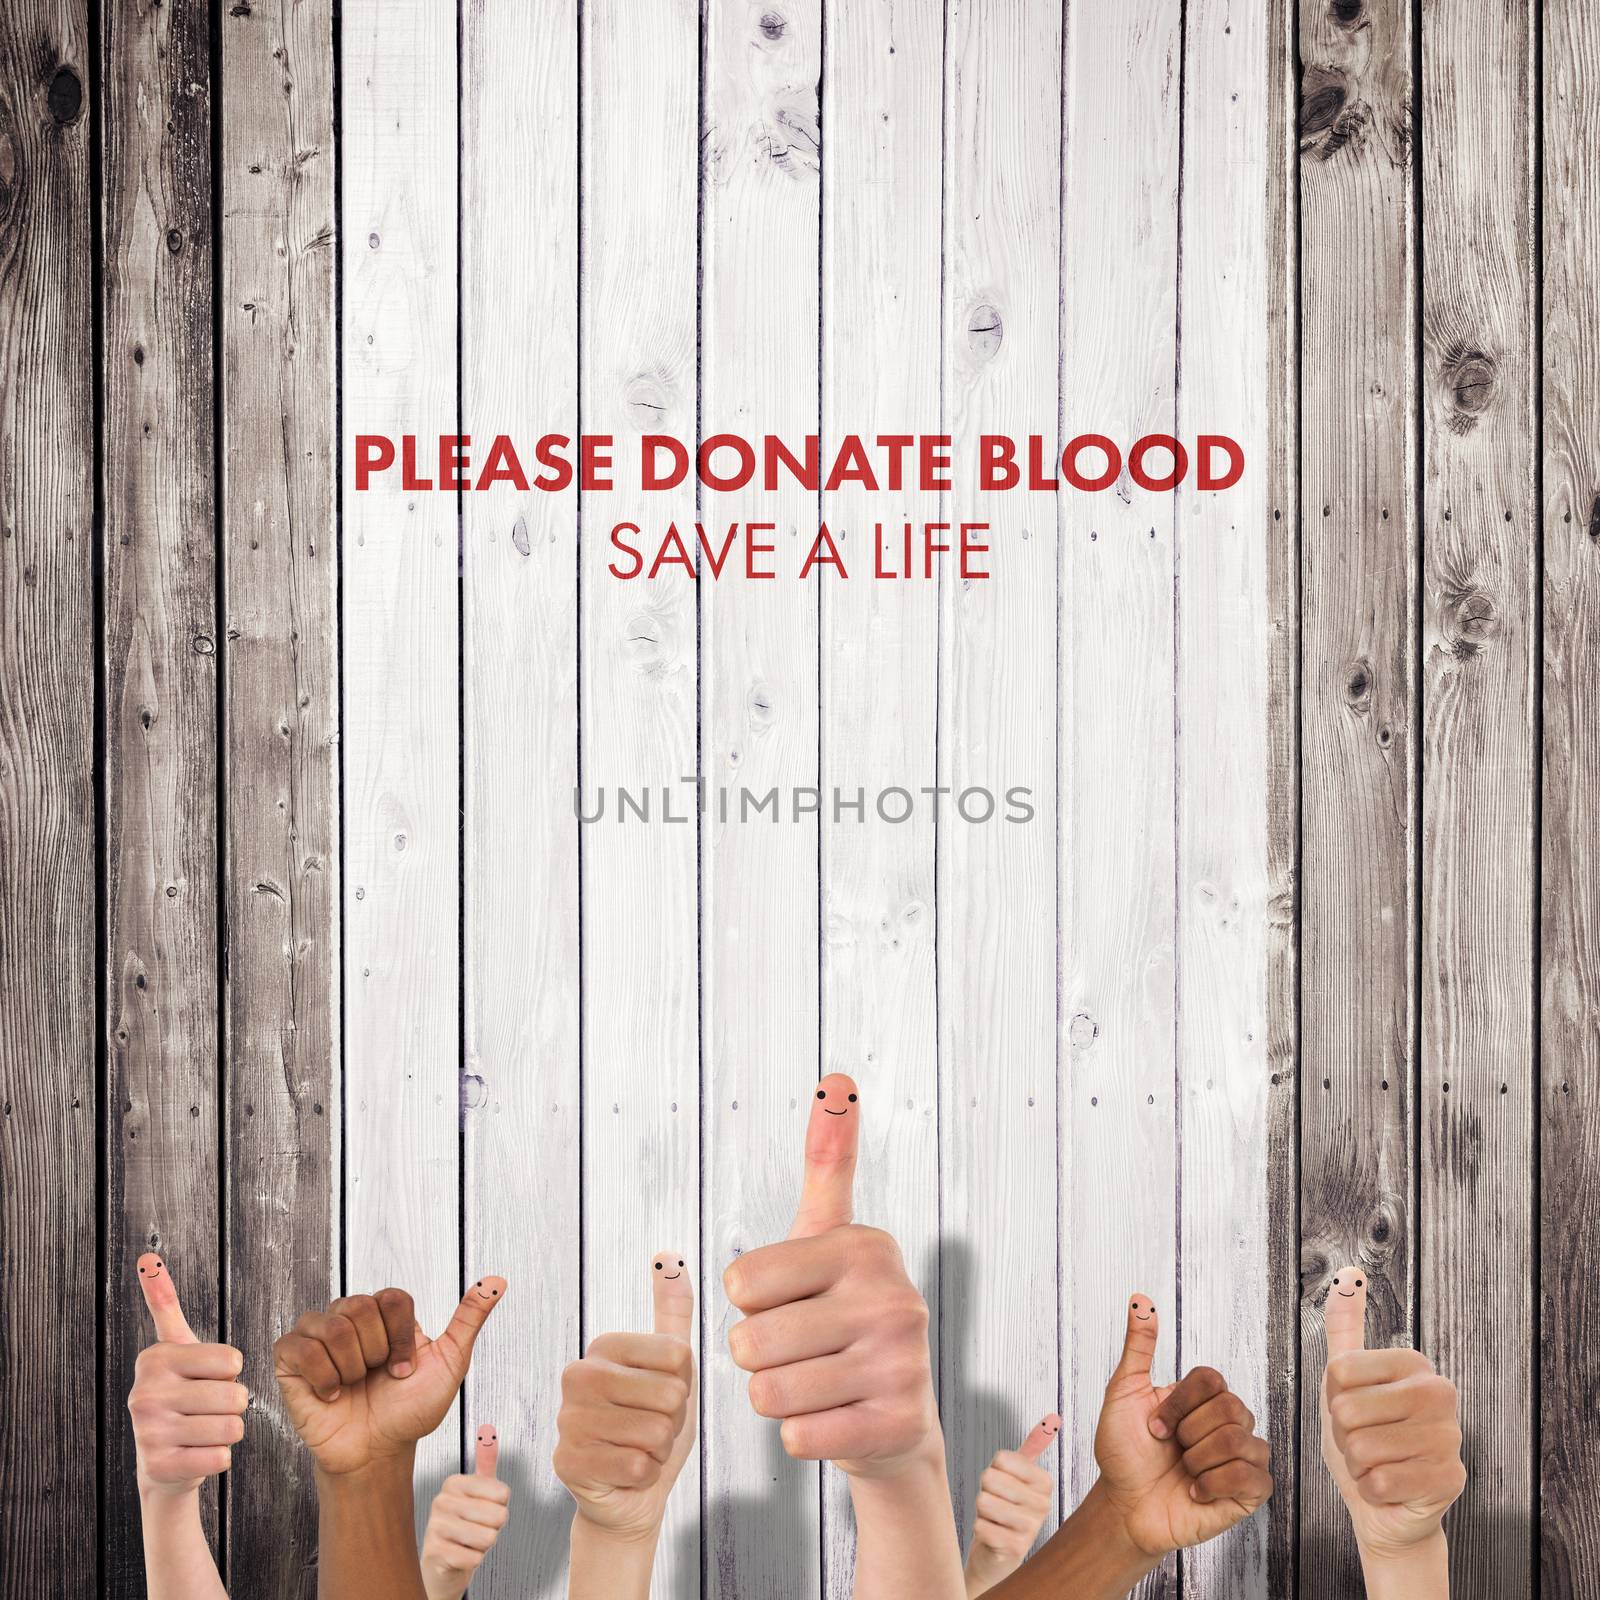 Composite image of blood donation by Wavebreakmedia